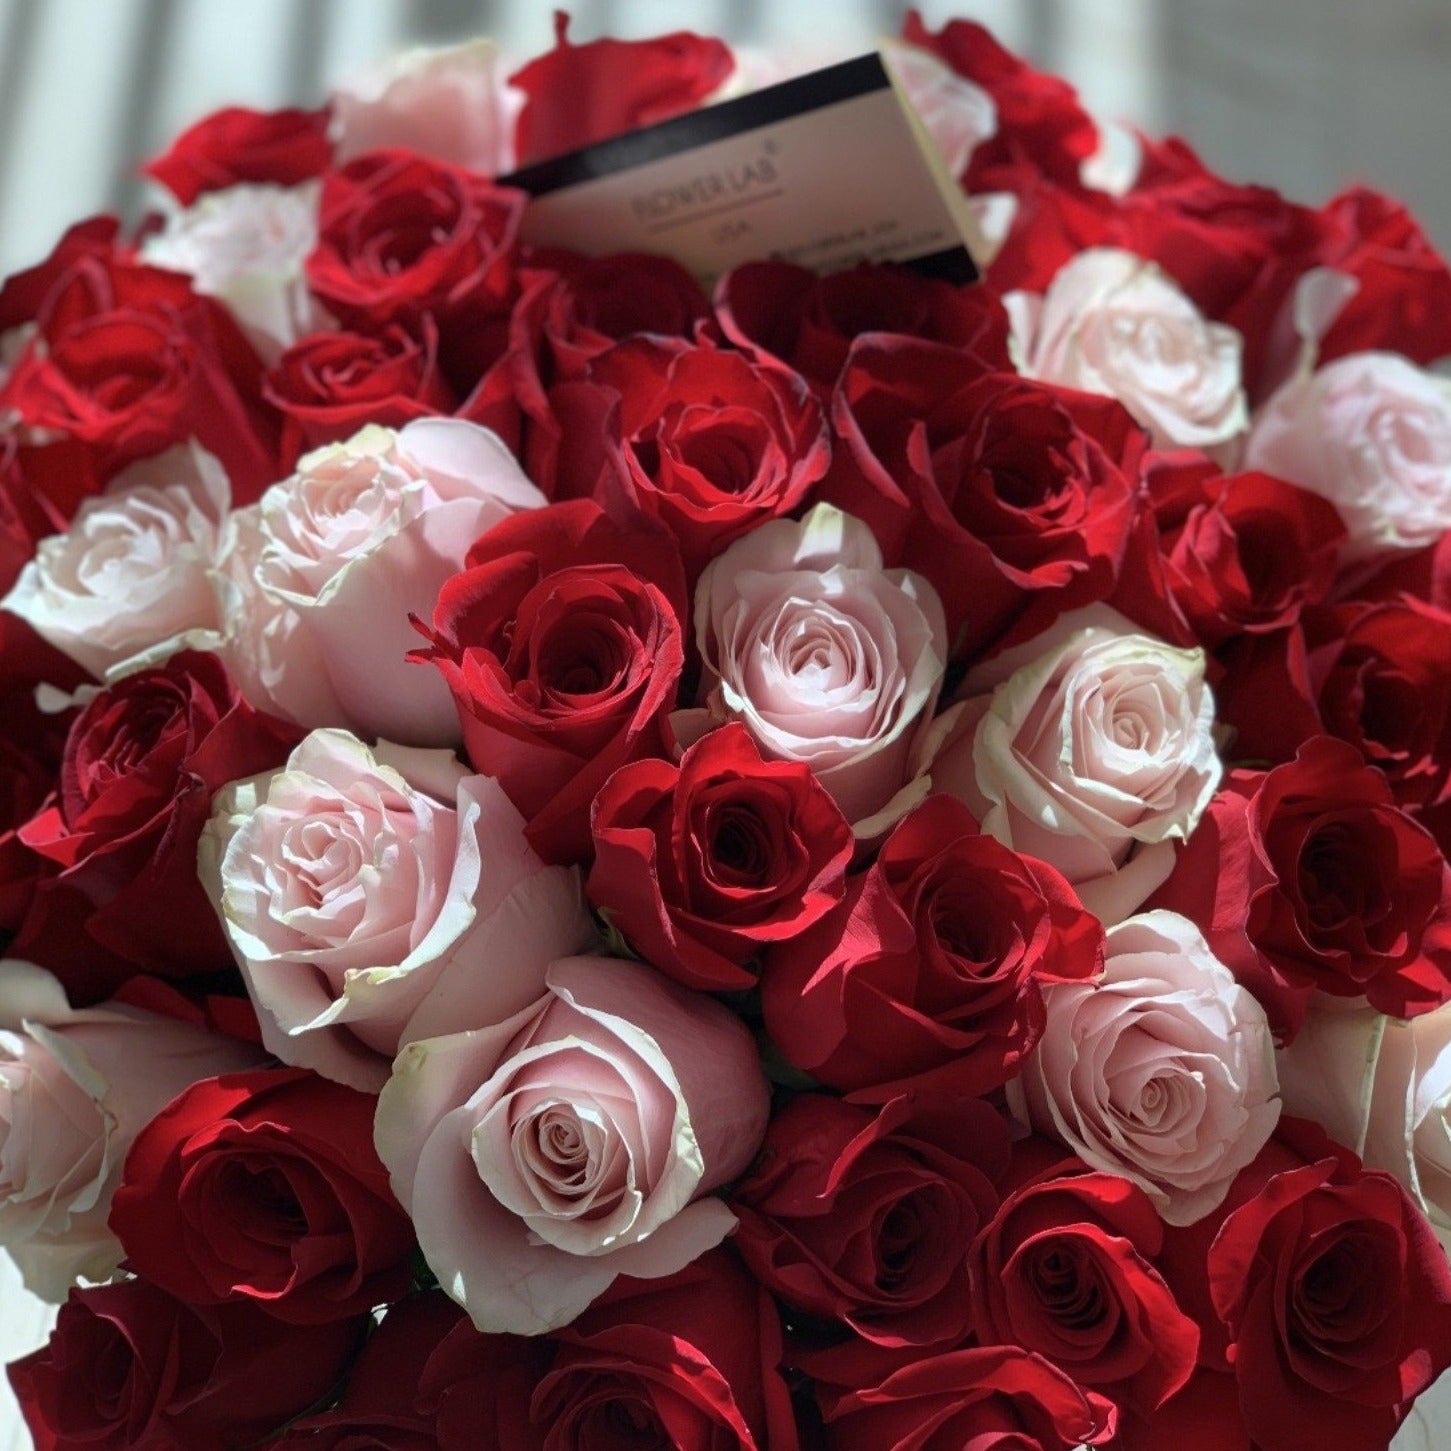 Red and pink roses bouquet